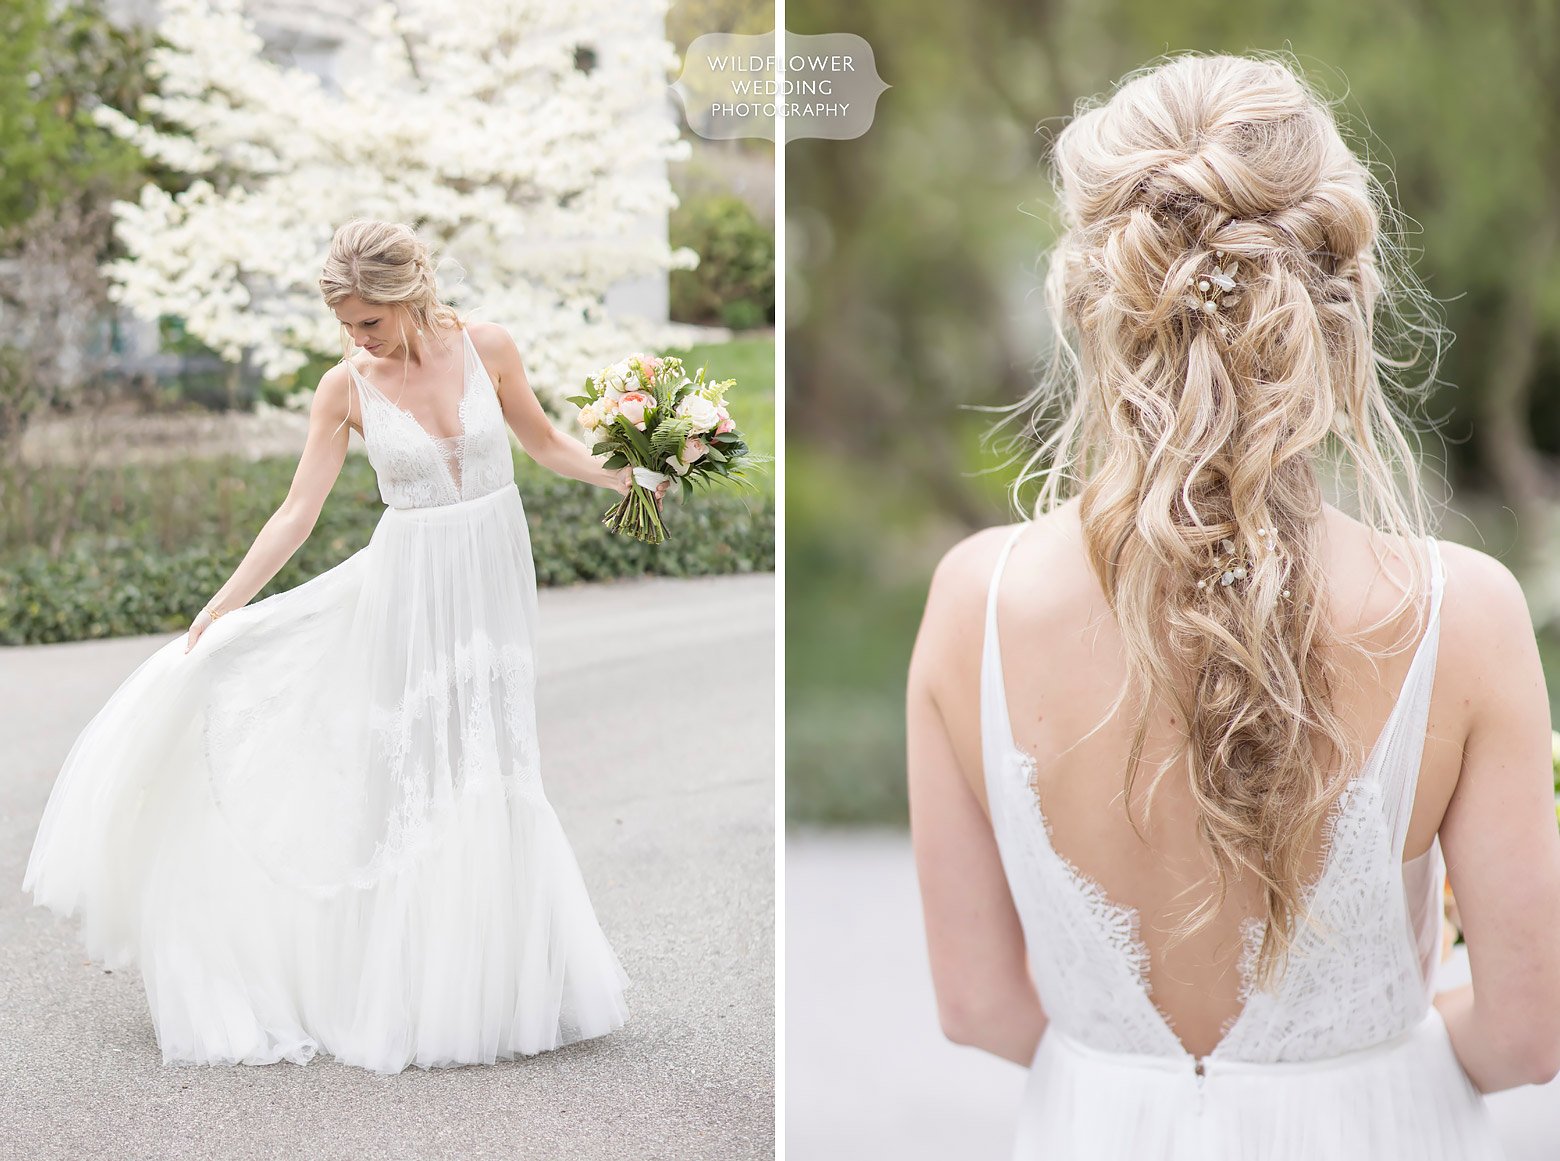 Messy bridal hairstyle for St. Louis outdoor wedding.